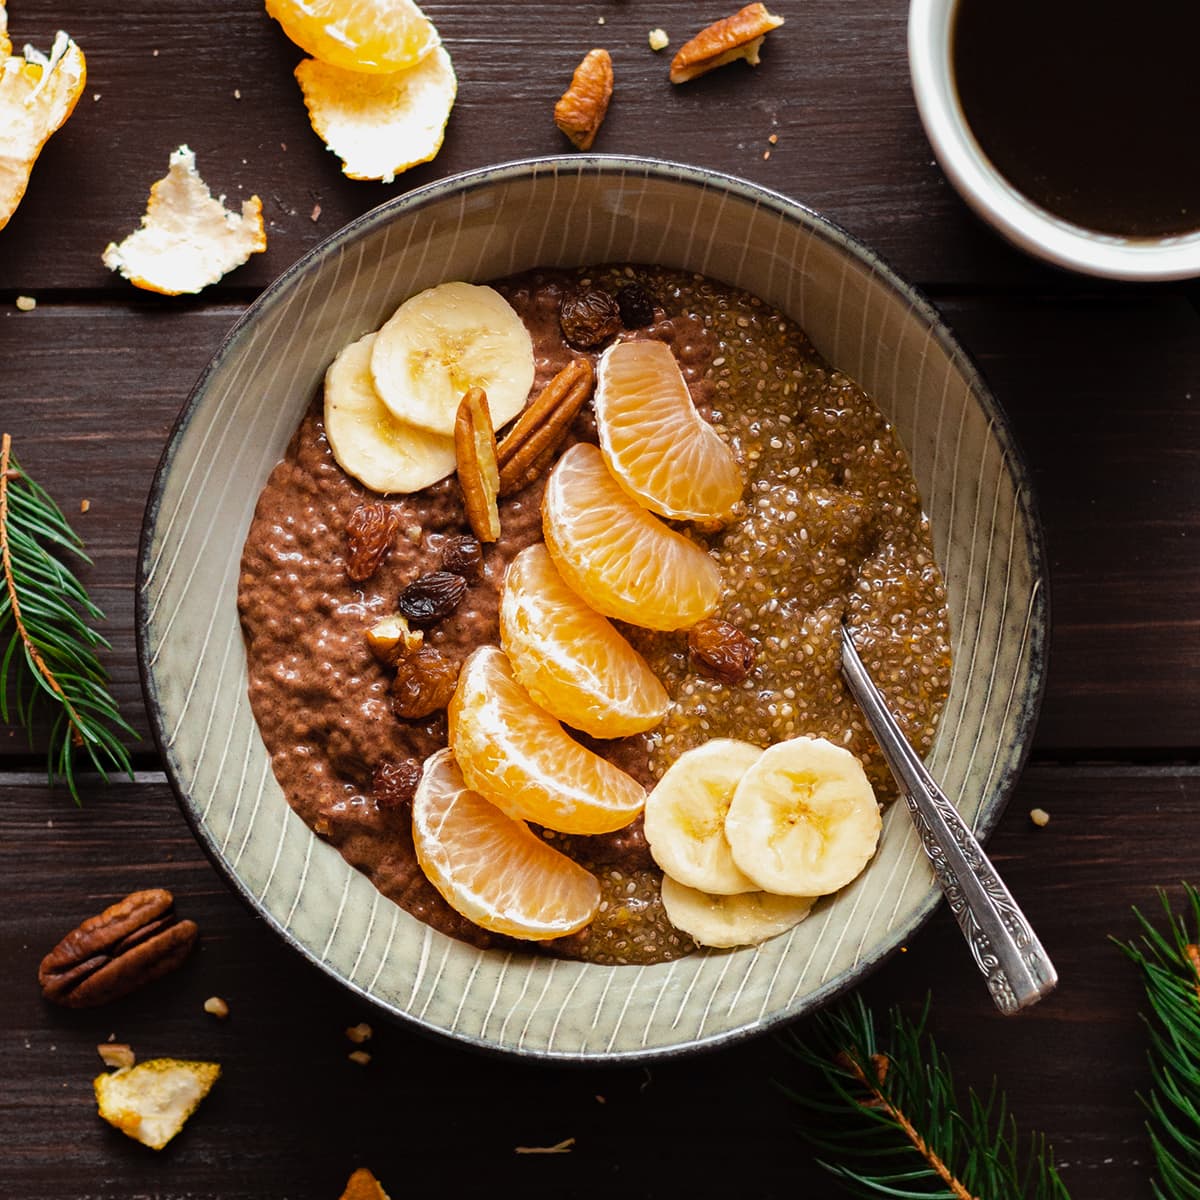 Tangerine Chocolate Chia Pudding in a bowl on a dark wooden table with a cup of coffee on the left.